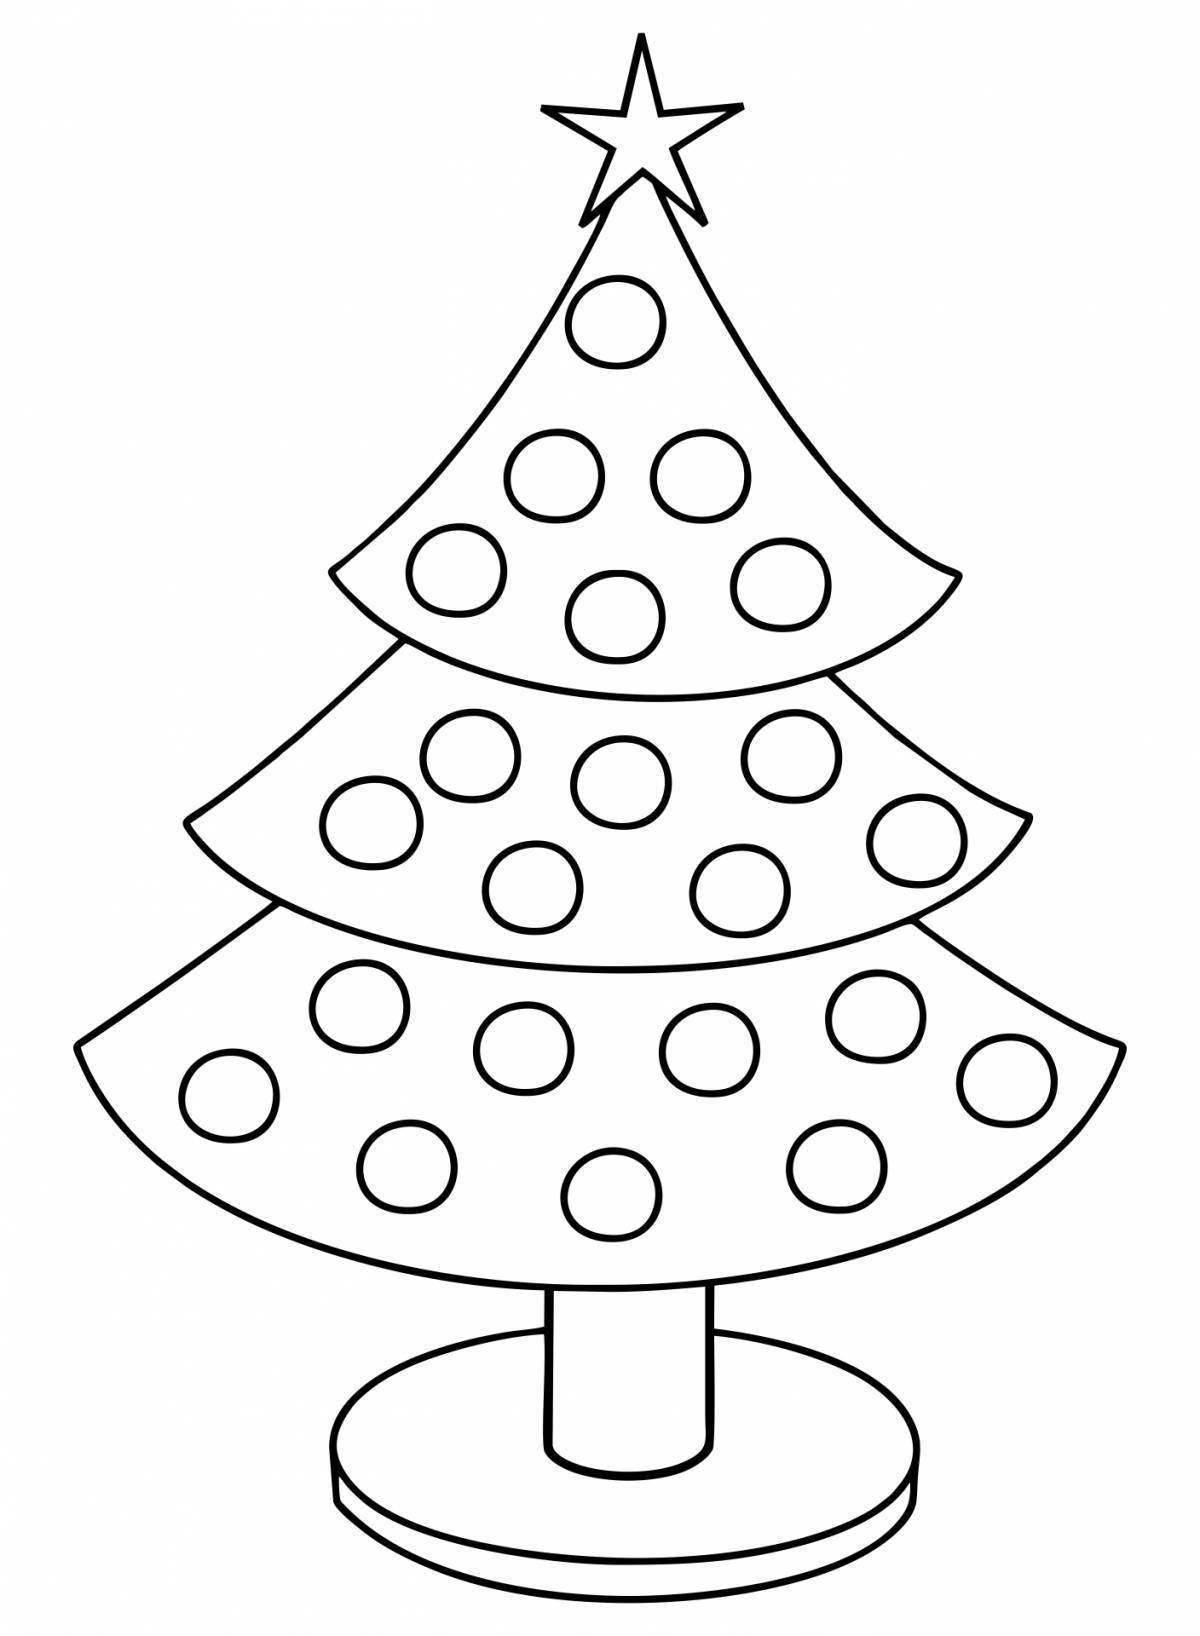 Coloring book festive Christmas tree for children 5-6 years old